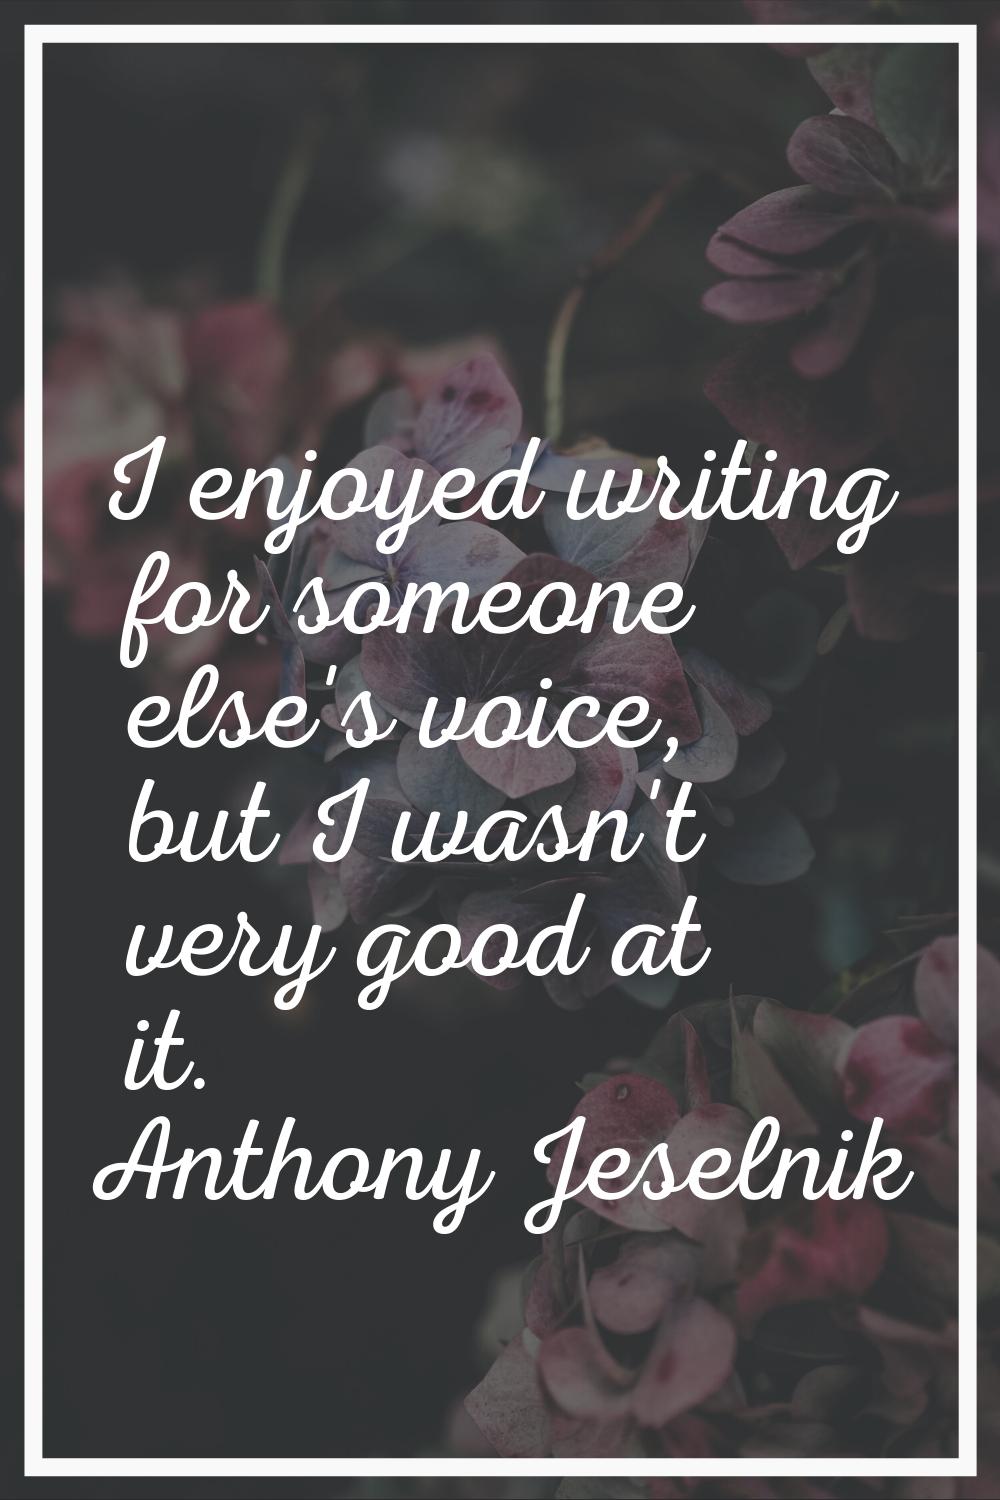 I enjoyed writing for someone else's voice, but I wasn't very good at it.